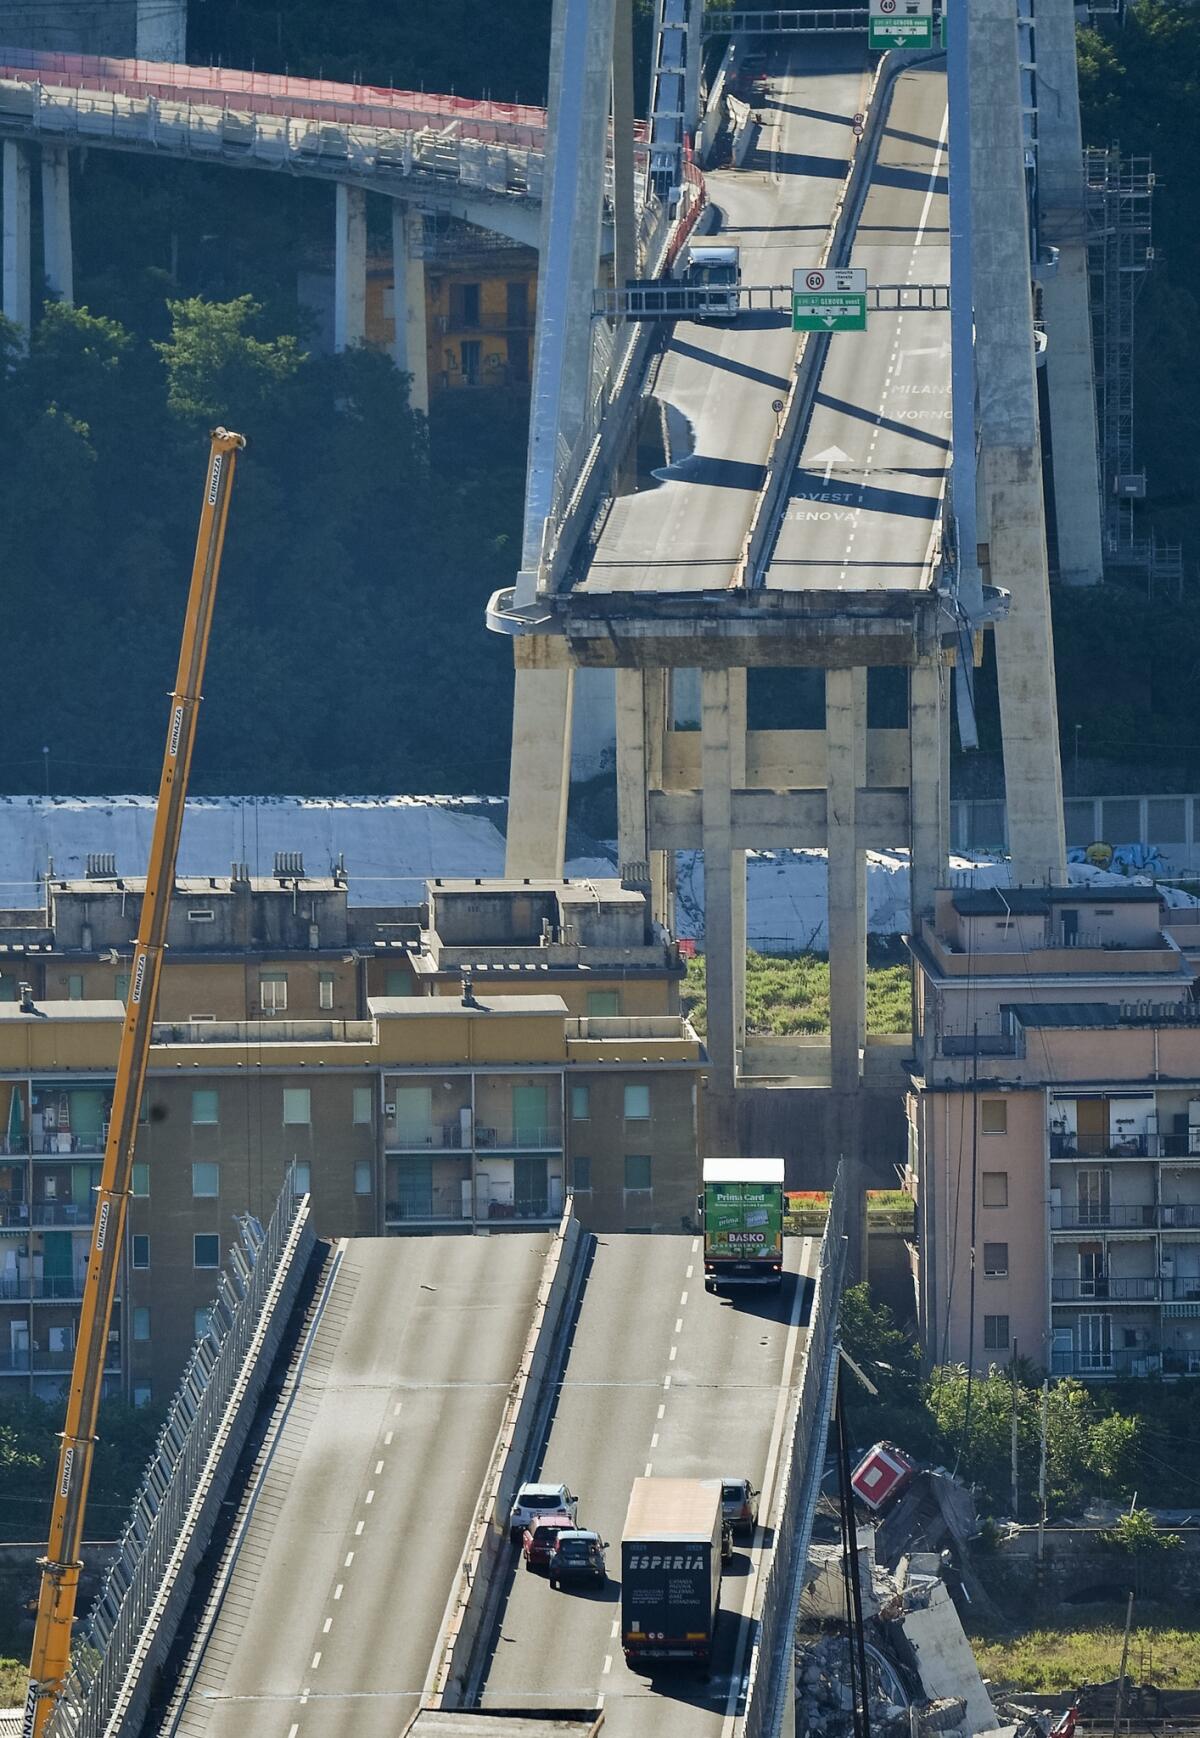 Vehicles are blocked on the collapsed Morandi highway bridge in Genoa, northern Italy, on Wednesday.